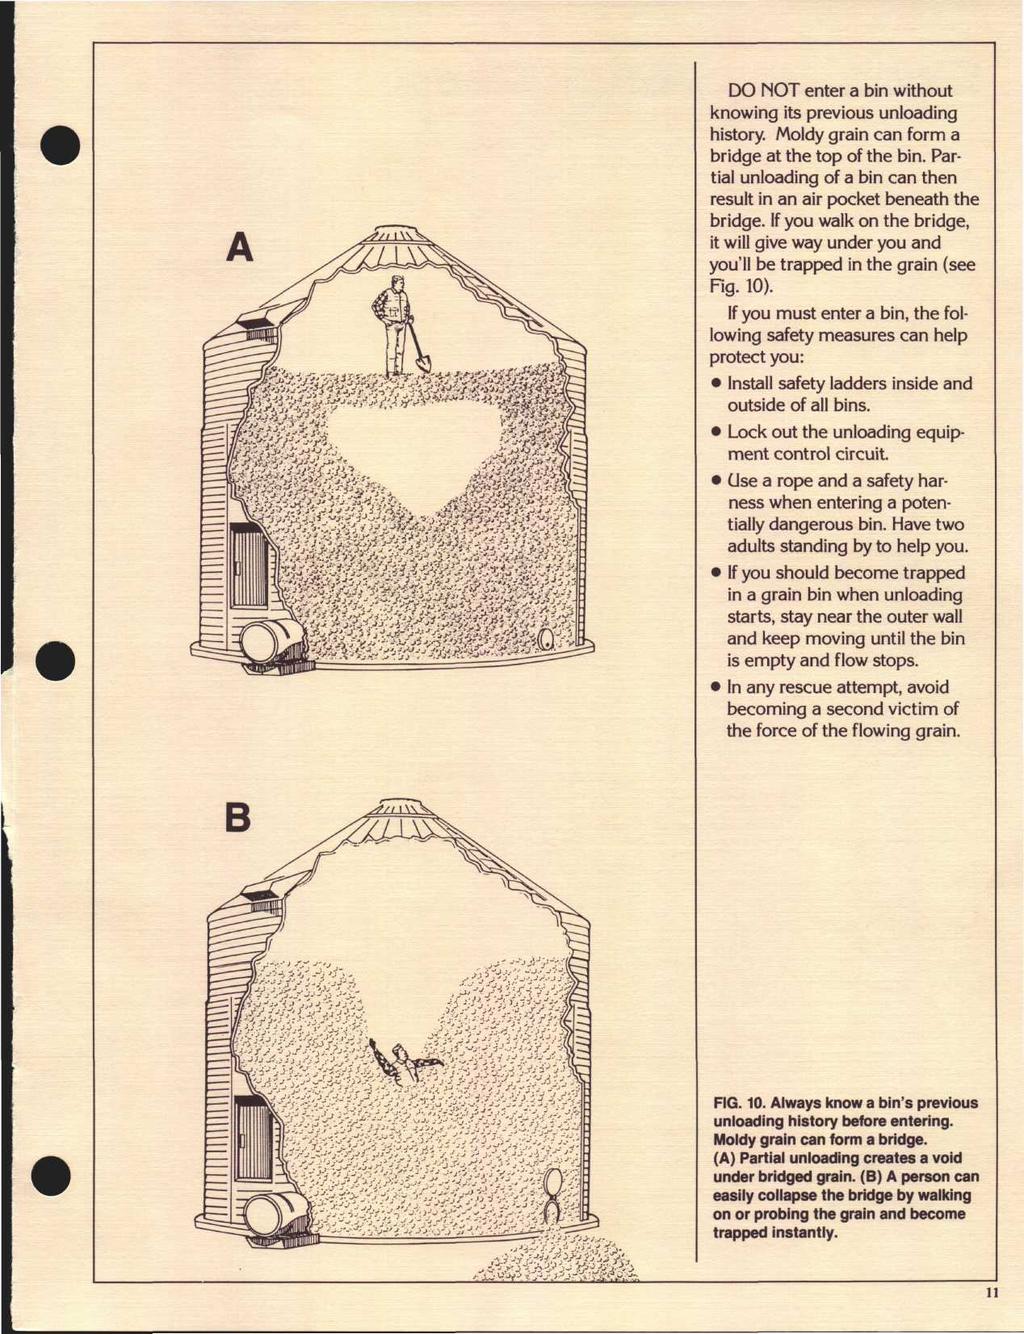 DO NOT enter a bin without knowing its previous unloading history. Moldy grain can form a bridge at the top of the bin. Partial unloading of a bin can then result in an air pocket beneath the bridge.